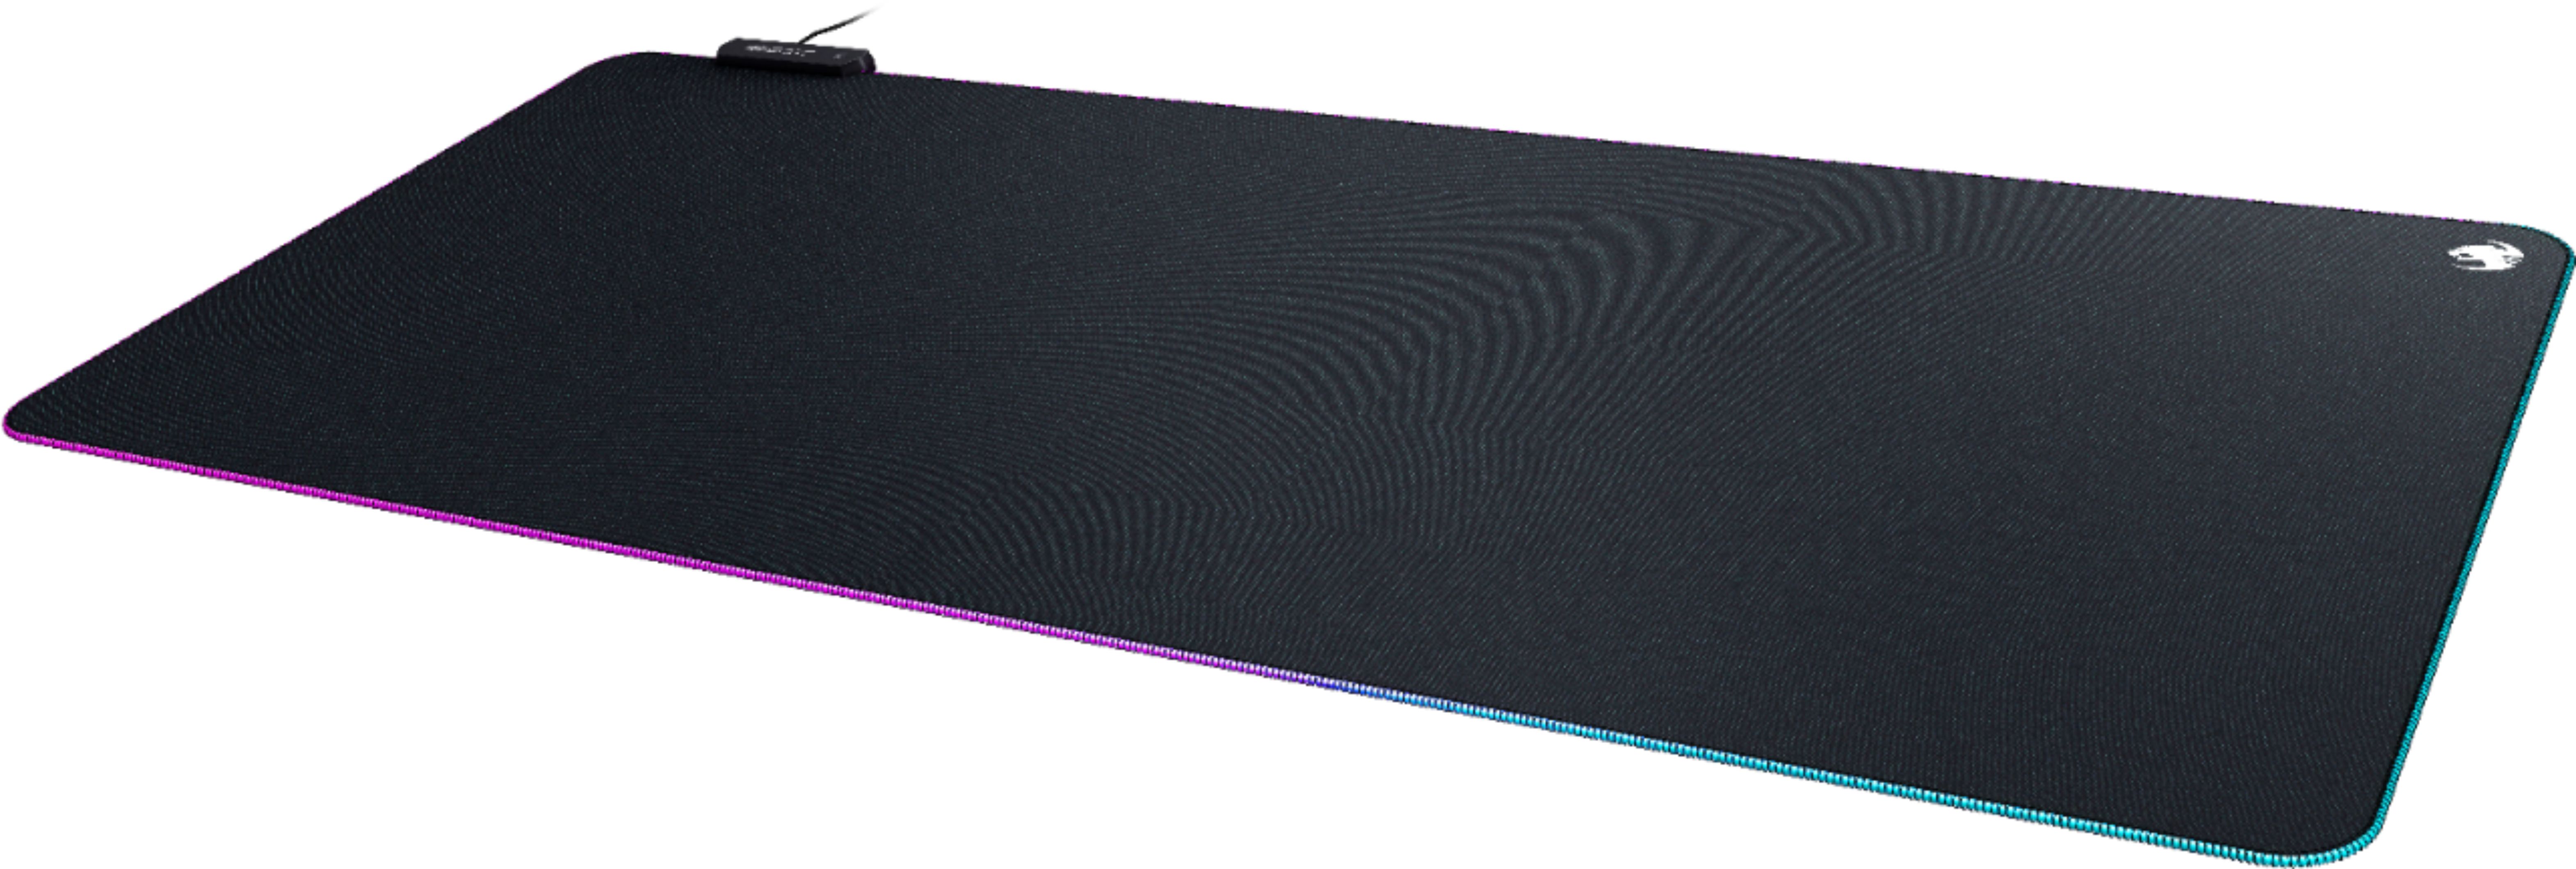 ROCCAT Sense AIMO XXL Ultra-Wide PC Gaming Mousepad, RGB Illumination, High  Precision, Non Slip Back, Extended Keyboard Desktop Mouse Pad with Stitched  Edges, Smooth, Black 